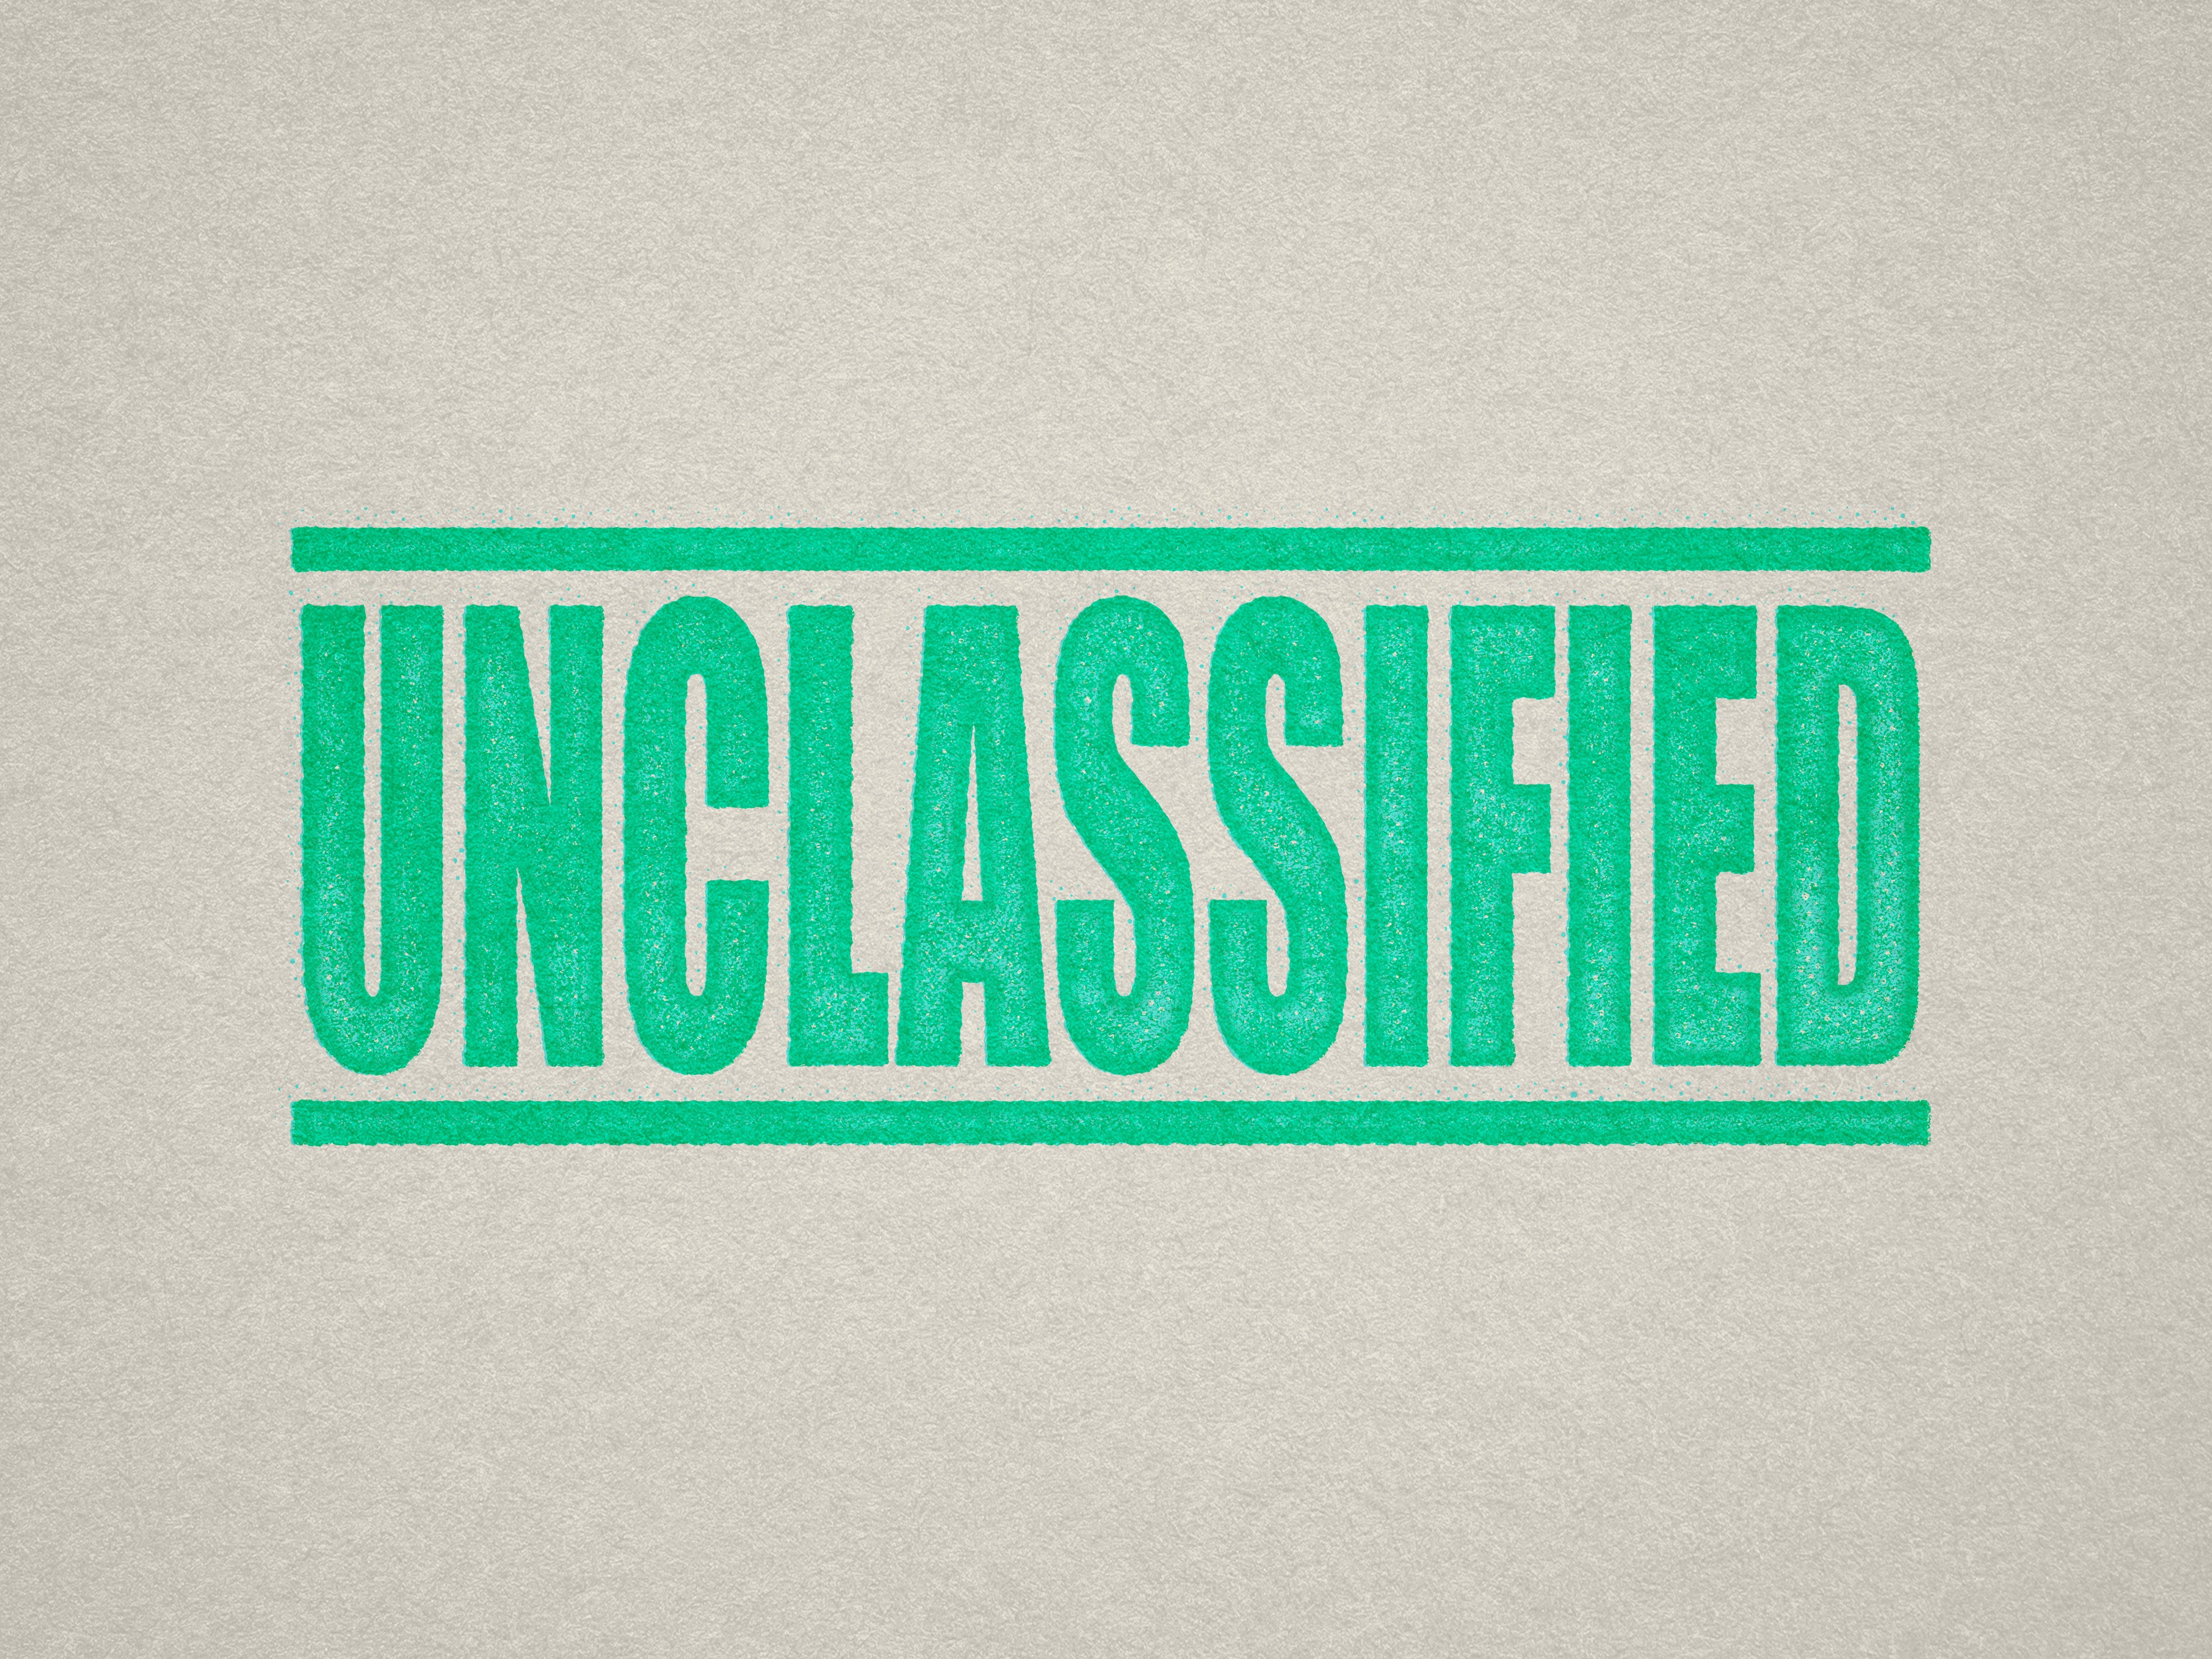 Mint Label for Unclassified Documents